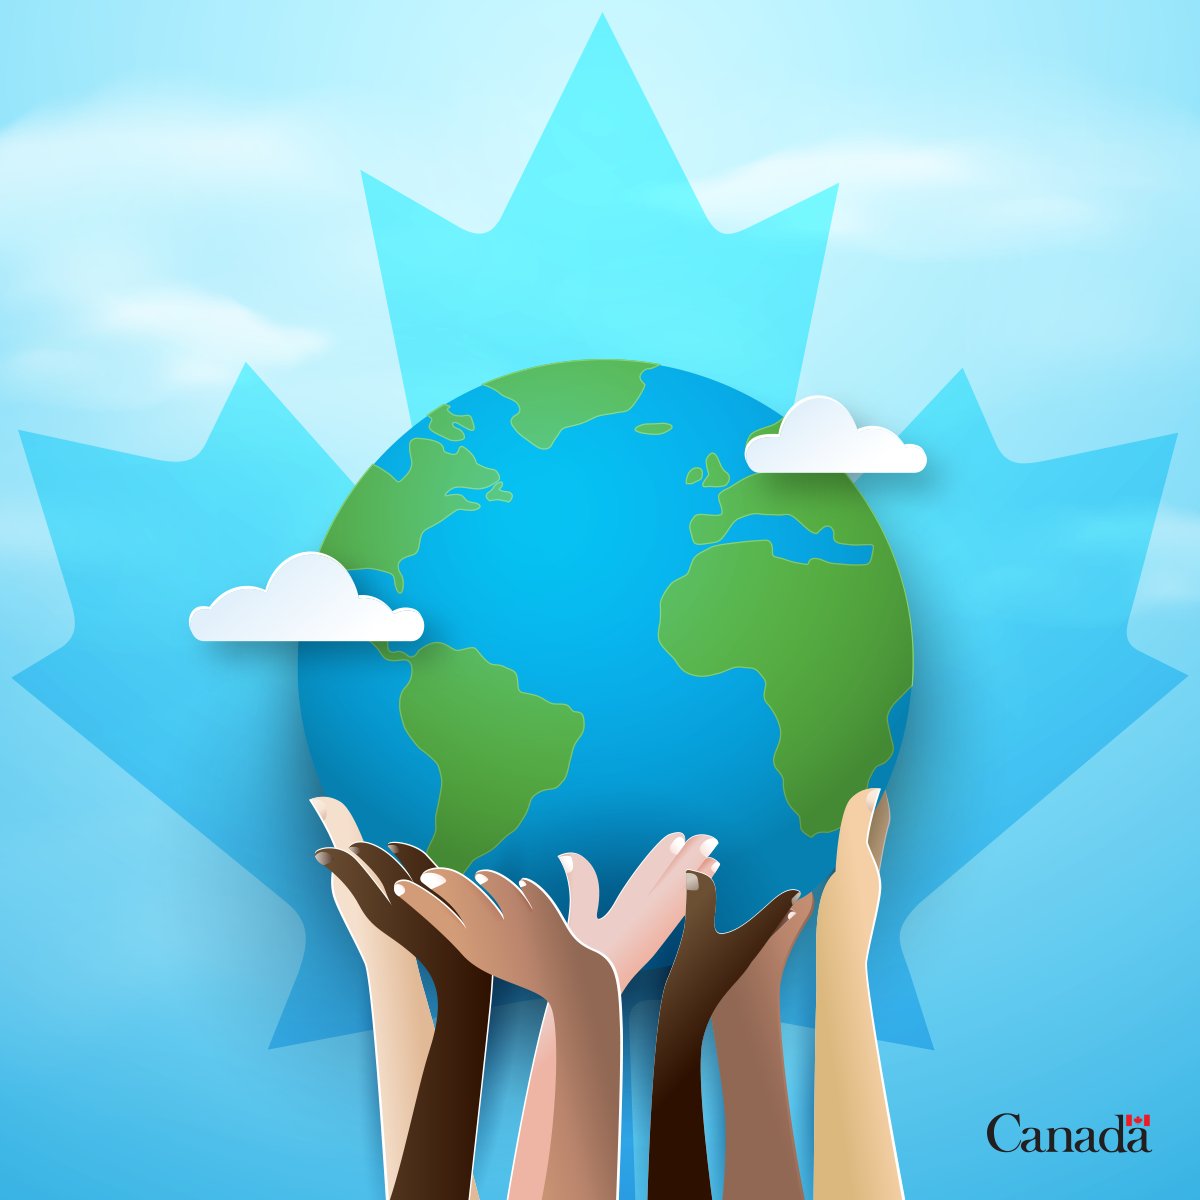 #DYK? A clean environment from plastic wastes is justice for our planet and future generations. That is why 🇨🇦 in 🇸🇸 believes in our collective responsibility as caretakers of mother nature, plants, and our land. #EarthDay